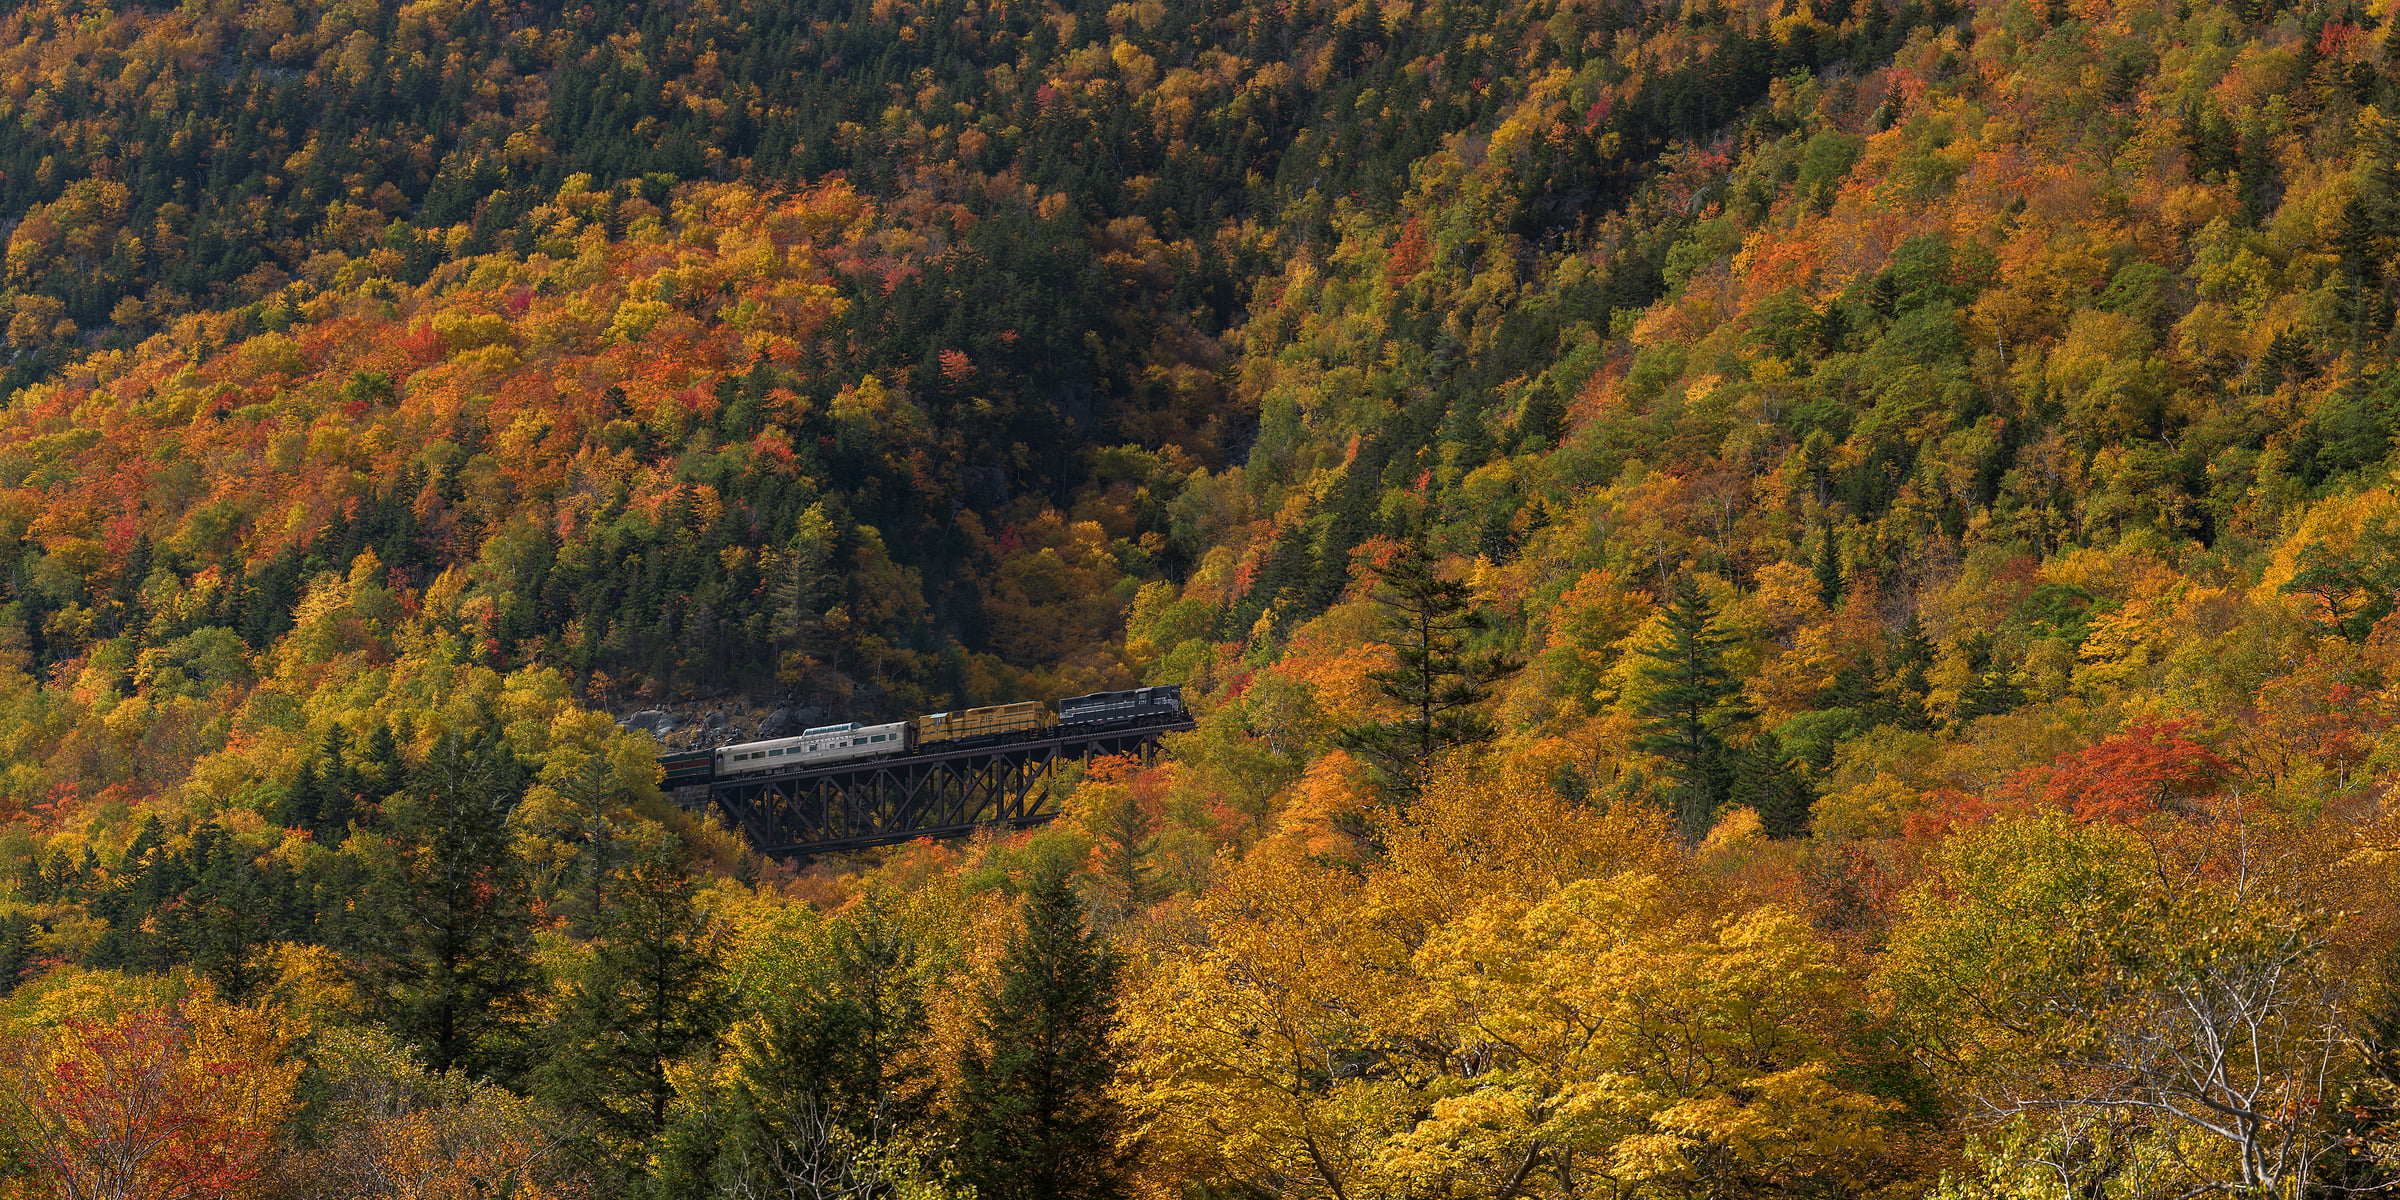 301 megapixels! A very high resolution, large-format VAST photo print of a train going over a trestle bridge amid autumn foliage on a mountain; fine art photograph created by Aaron Priest in Hart's Location, New Hampshire